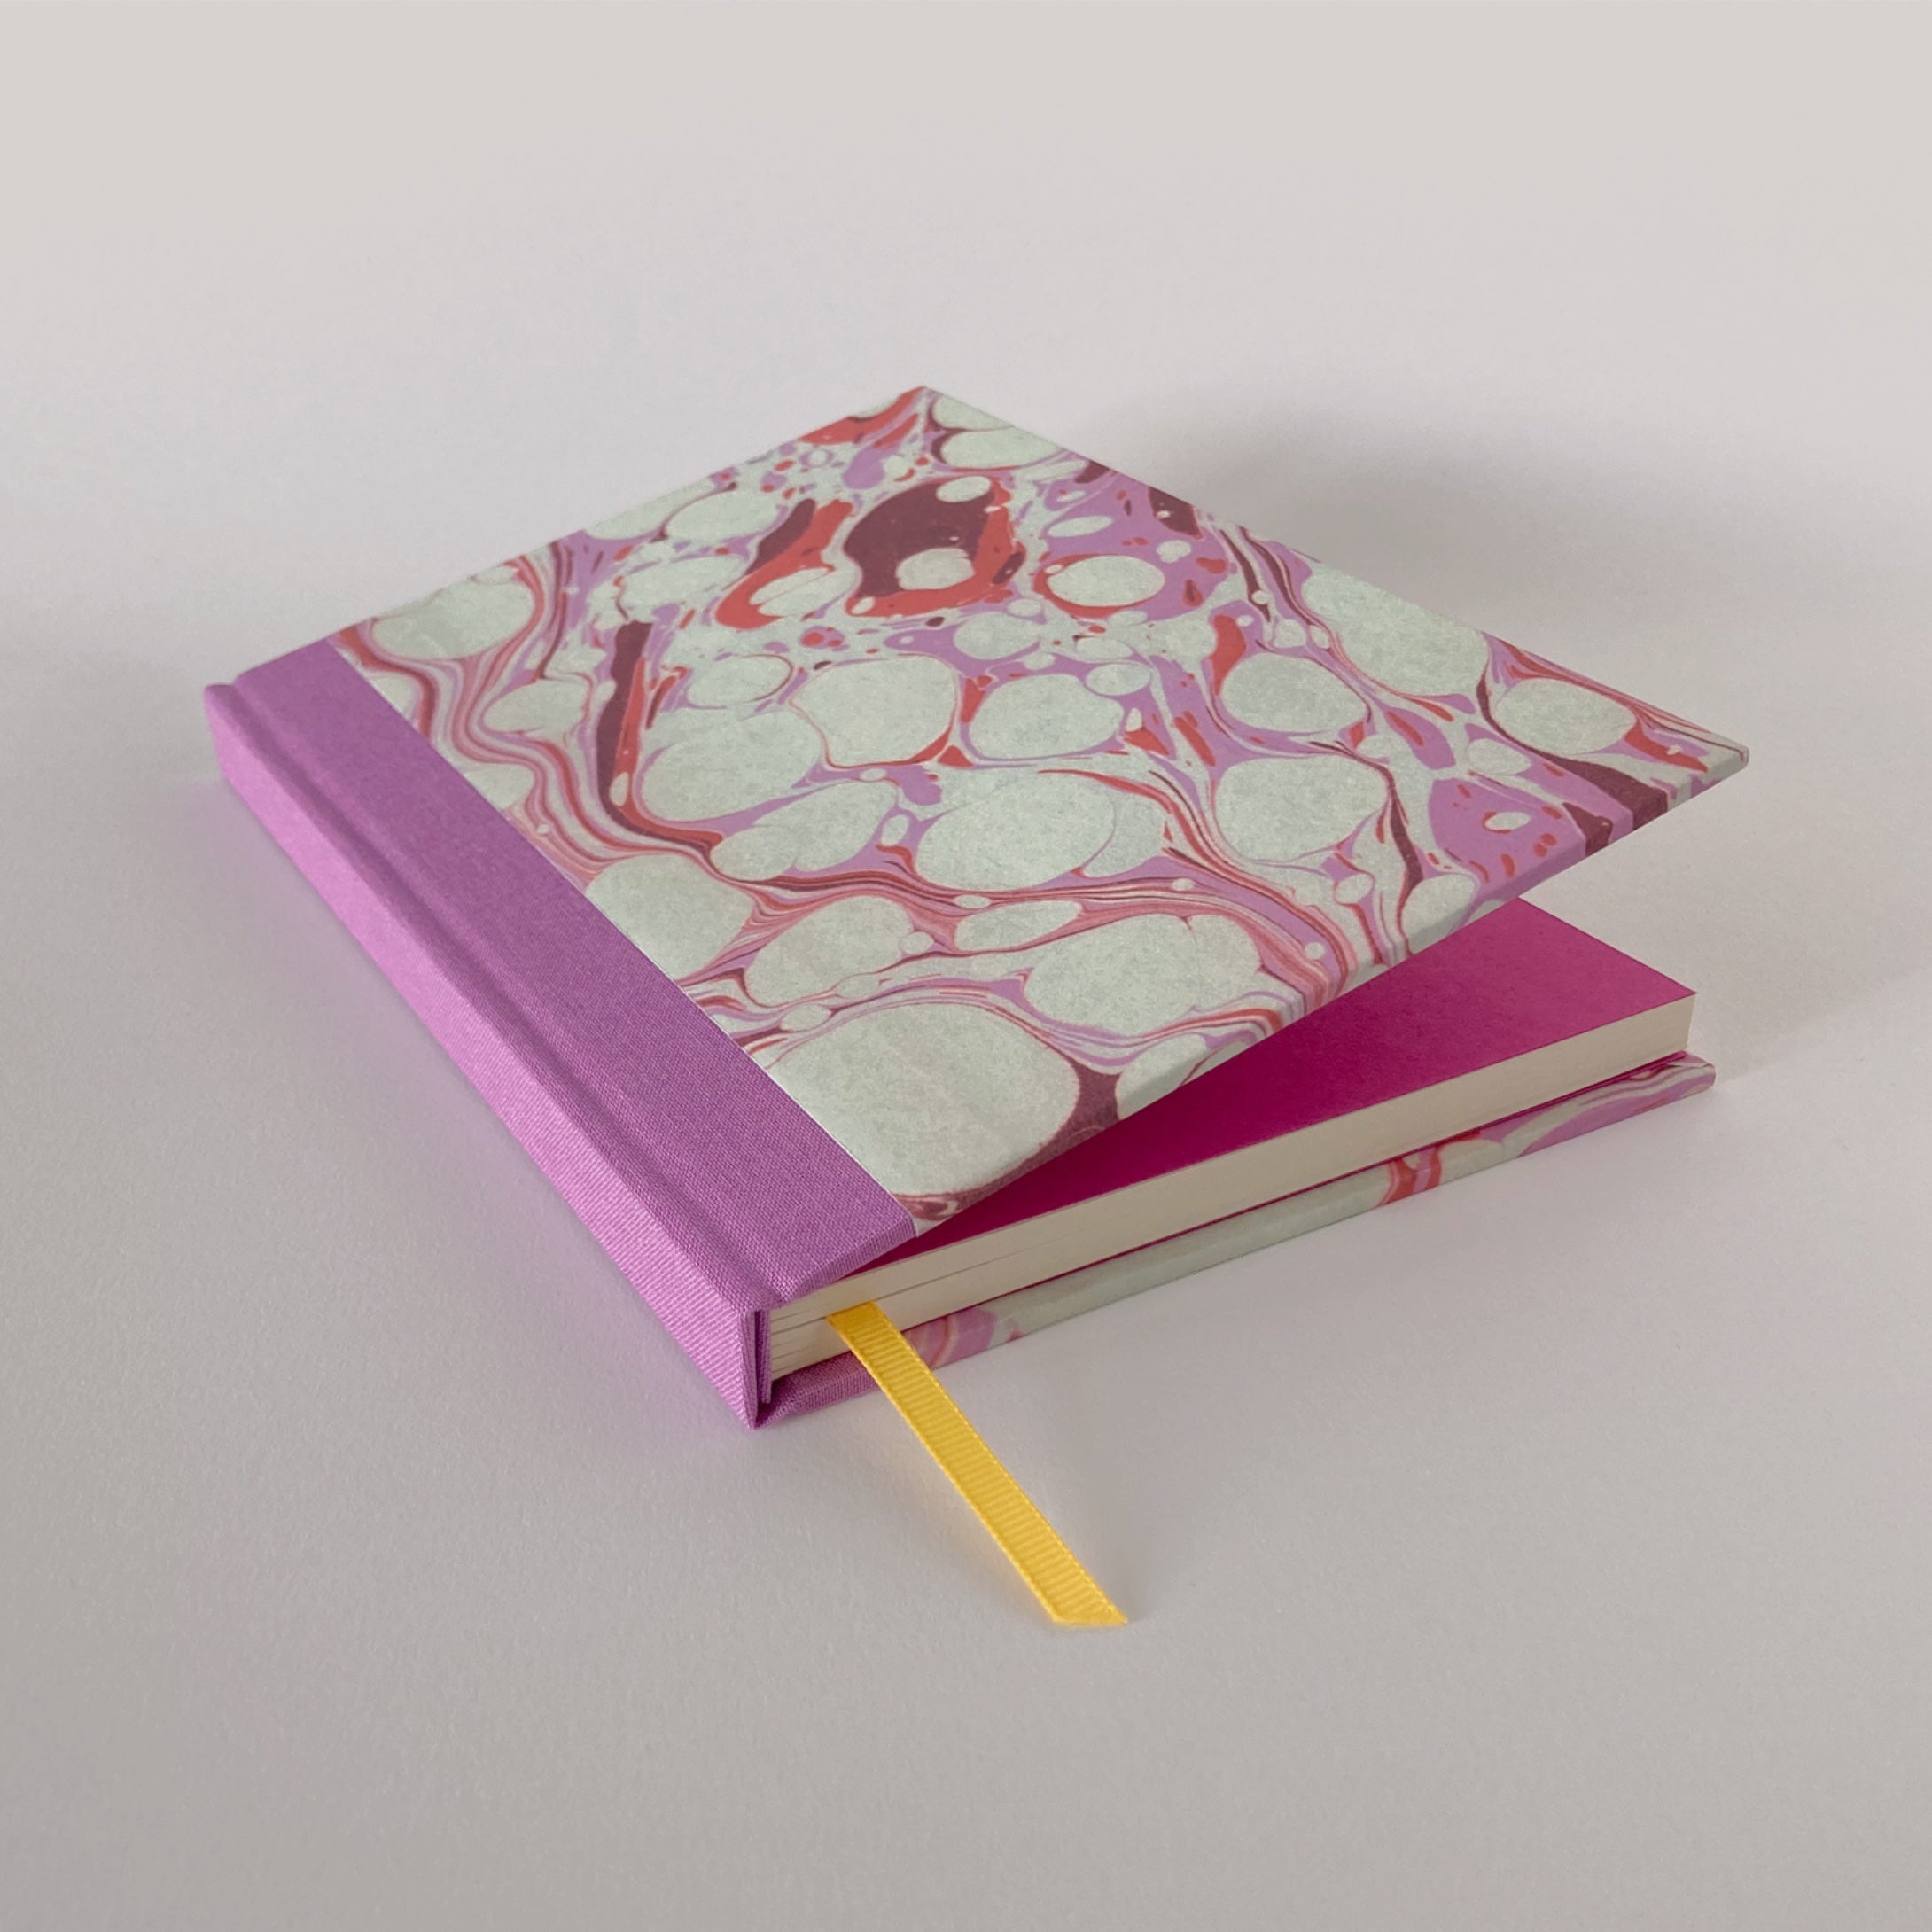 Pink marble hardback notebook partially open, revealing pink end pages.